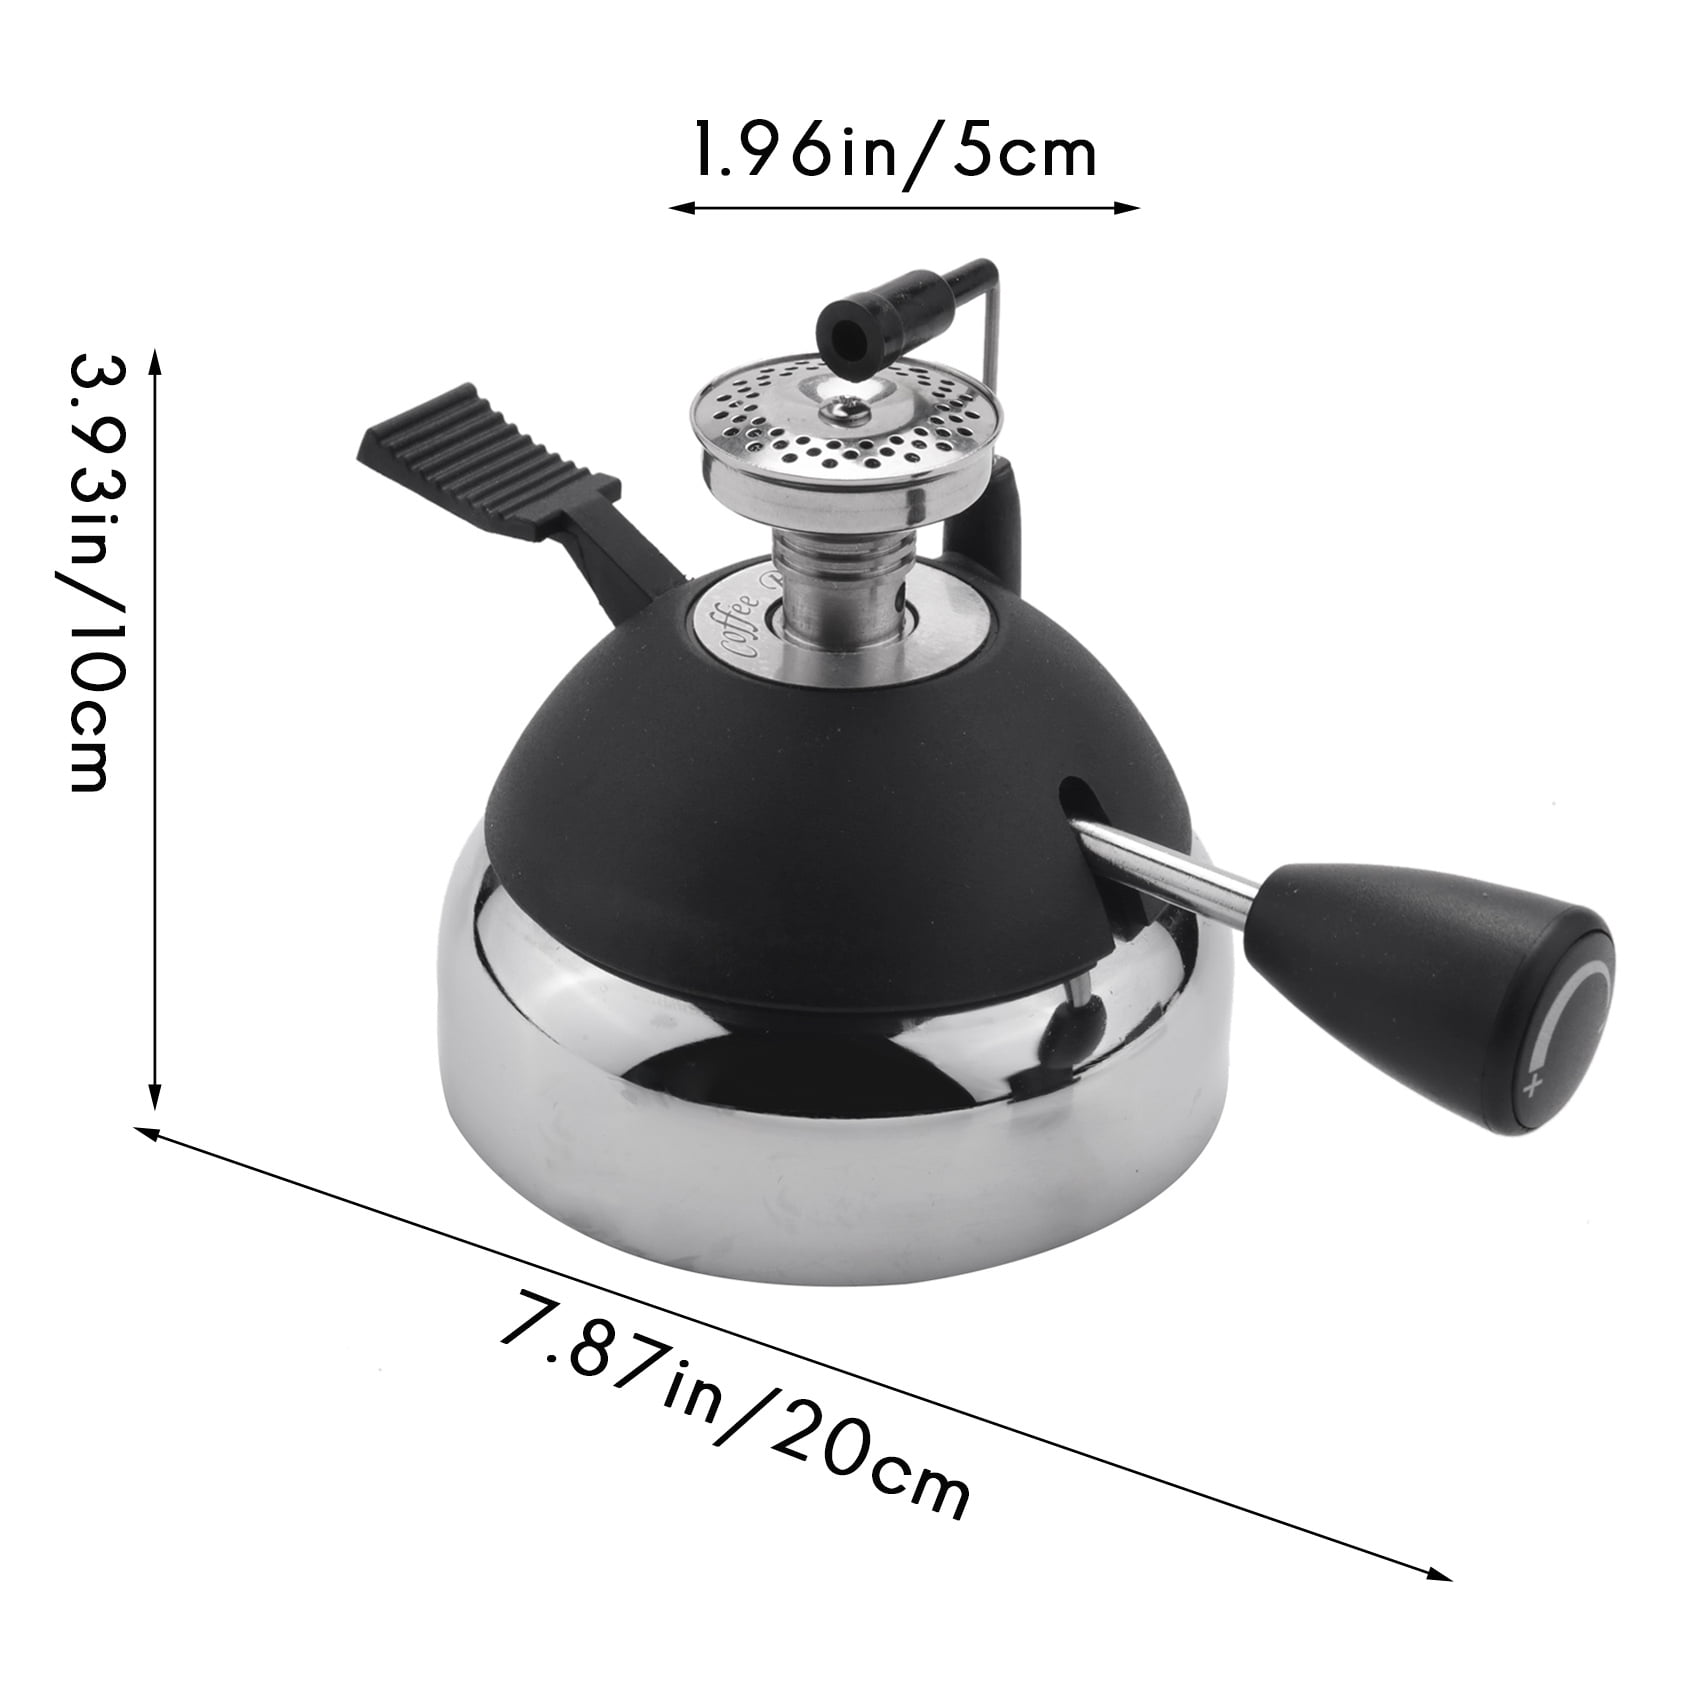 BlueFire Butane Mini Burner for Tabletop Coffee Siphon Syphon/w Furnace Stand and Assembly Rack Ceramic Windproof Torch Head Portable Cooking Stove